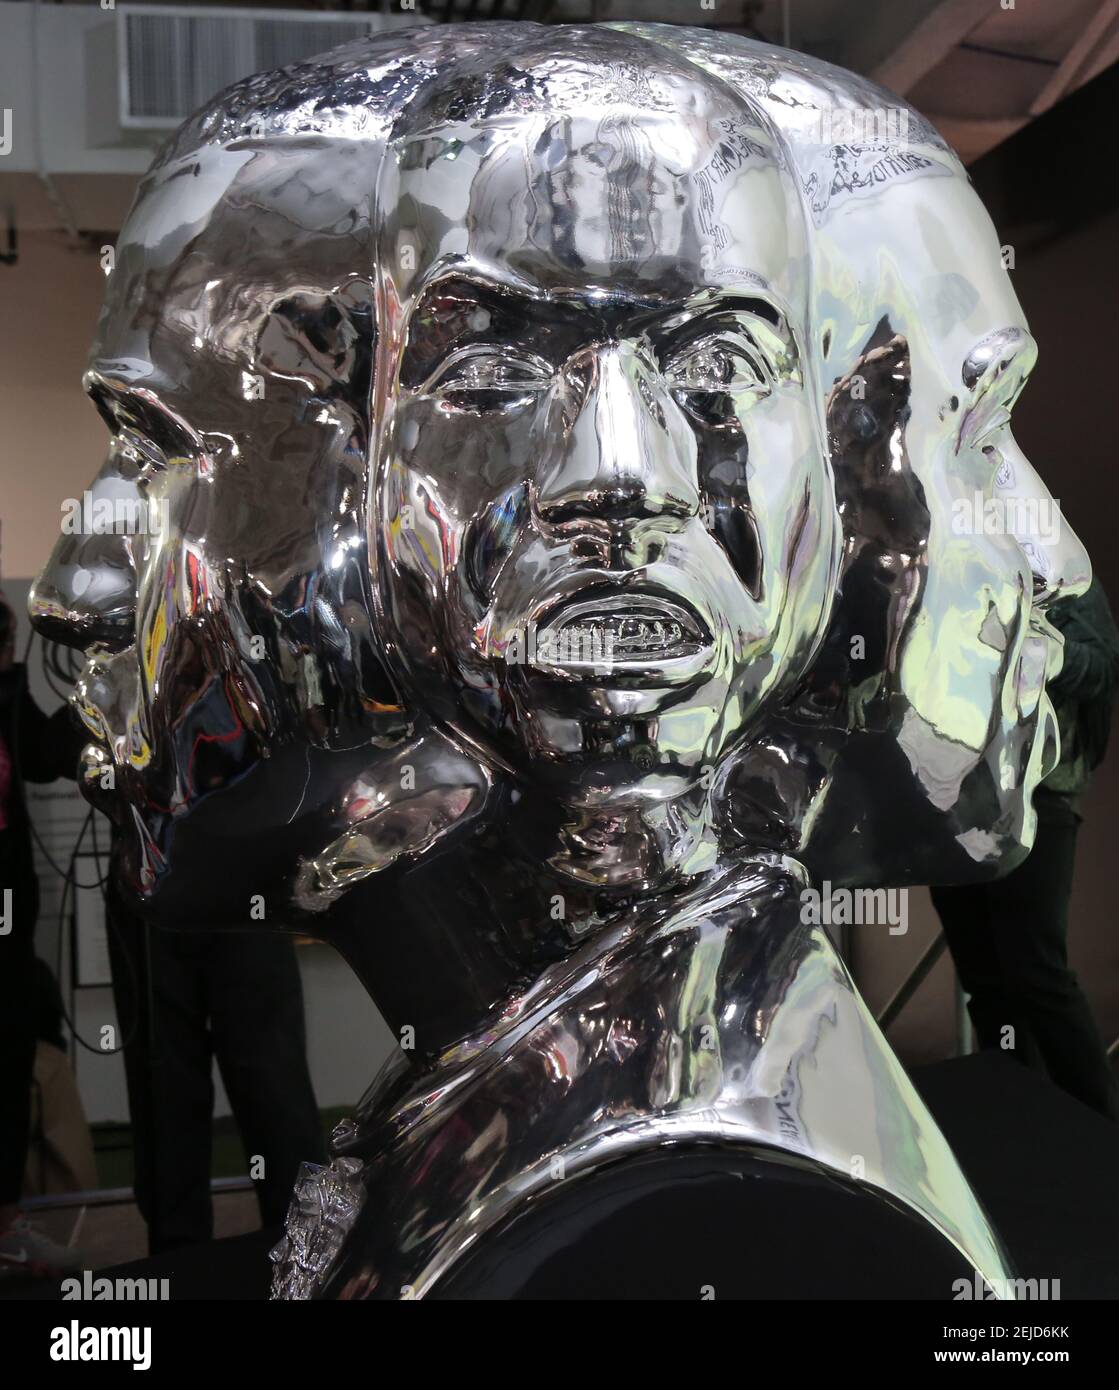 The unveiling of the NSEWest Statue held at Sneakertopia Inc. at The Promenade At Howard Hughes Center on January 24, 2020 in 20 in Los Angeles, CA, USA (Photo by Parisa Afsahi/Sipa USA) Stock Photo